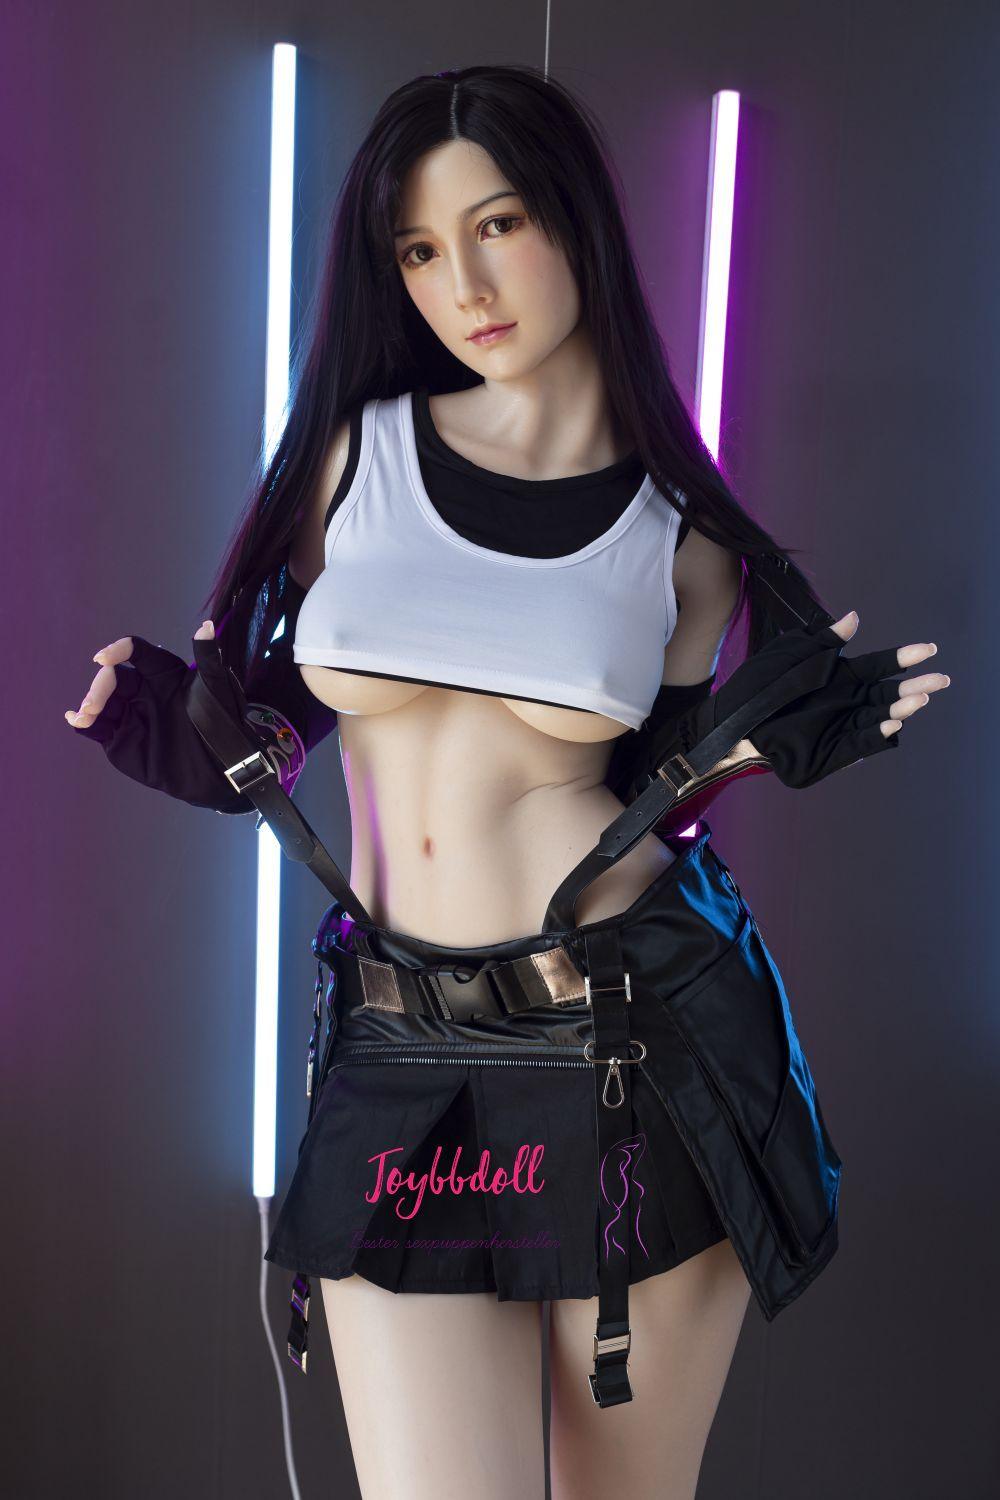 Neue Upgrade Tifa-165cm 5ft5 C Cup Cosplay Anime Final-Fantasy Sexpuppe - Joybbdoll-CST Doll